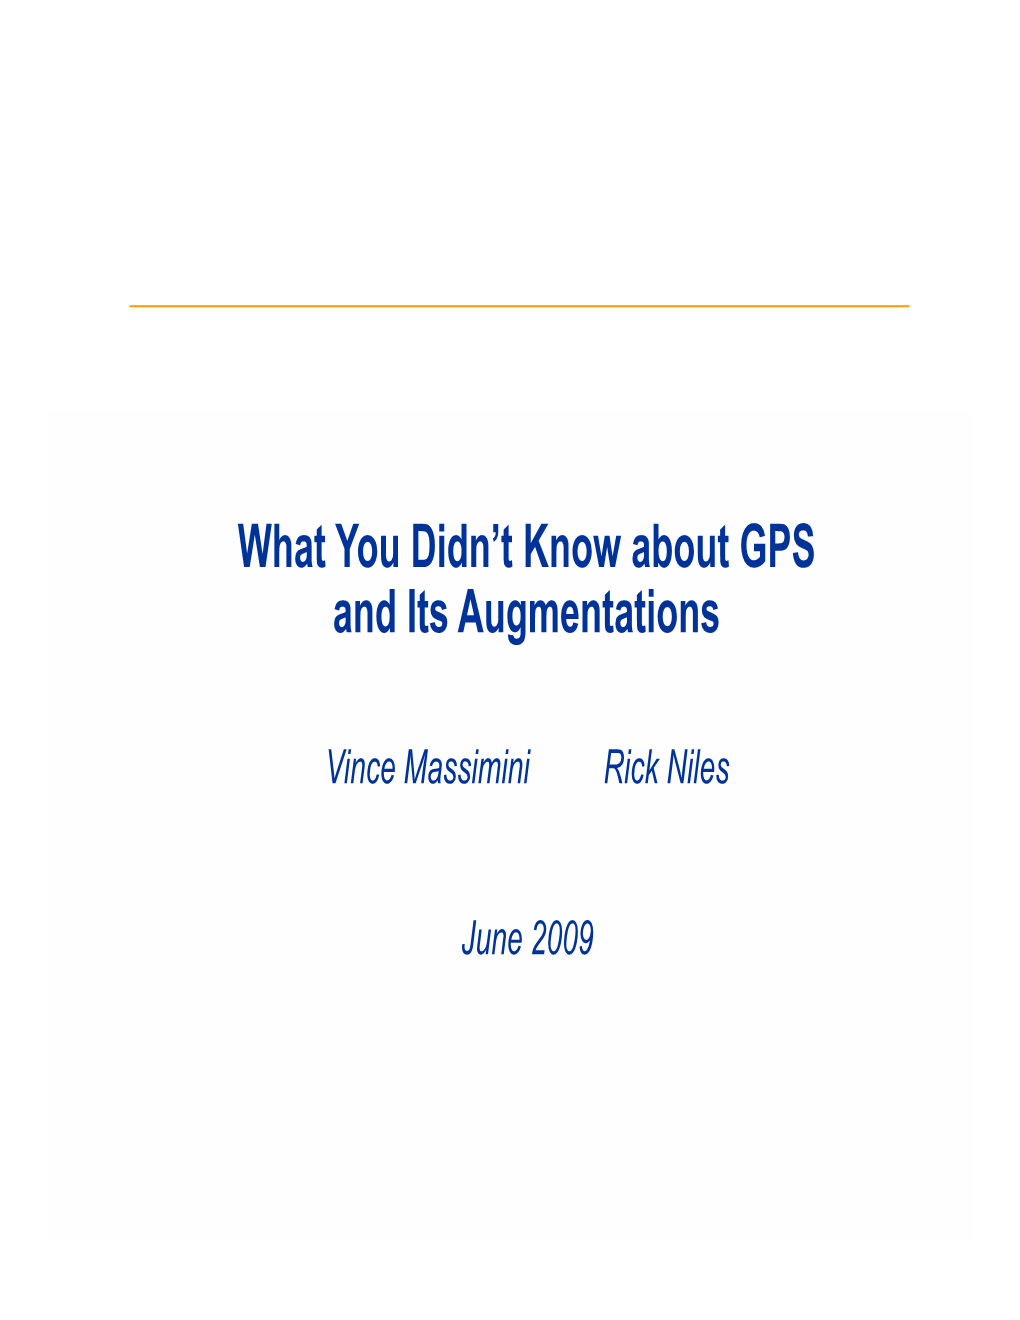 What You Didn't Know About GPS and Its Augmentations